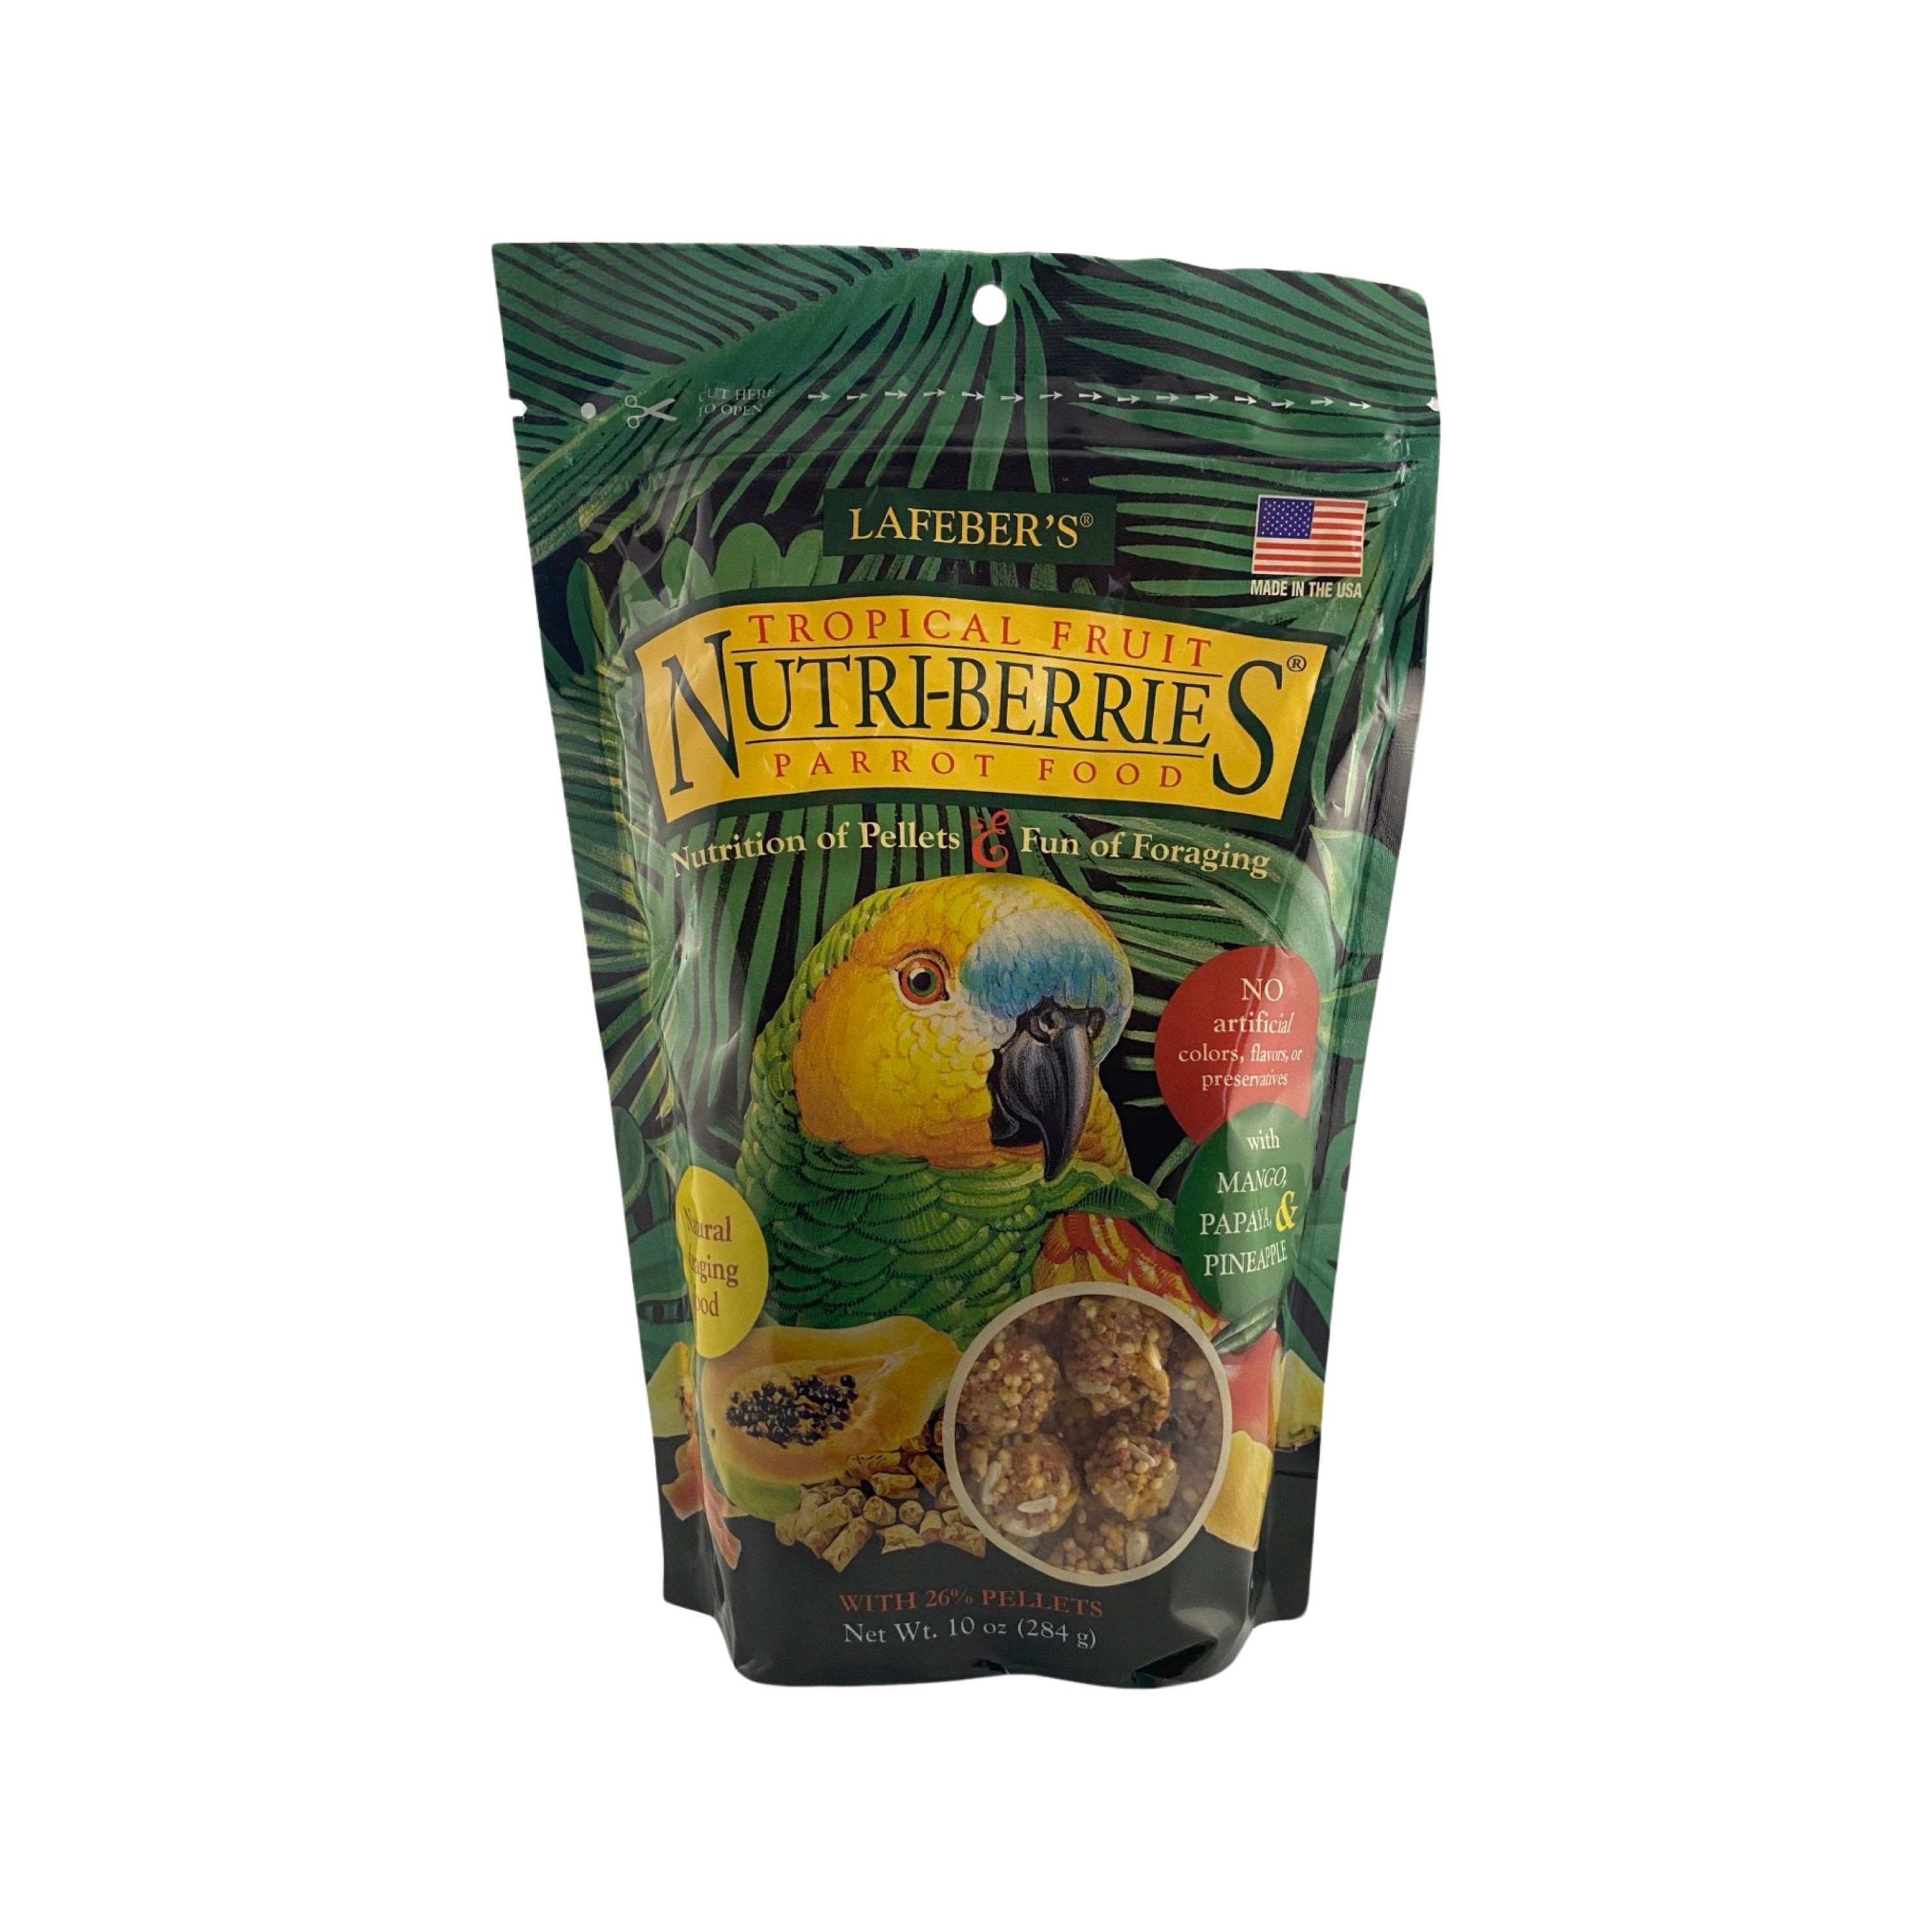 Lafeber’s Tropical Fruit Nutri-Berries - Feathered Follies